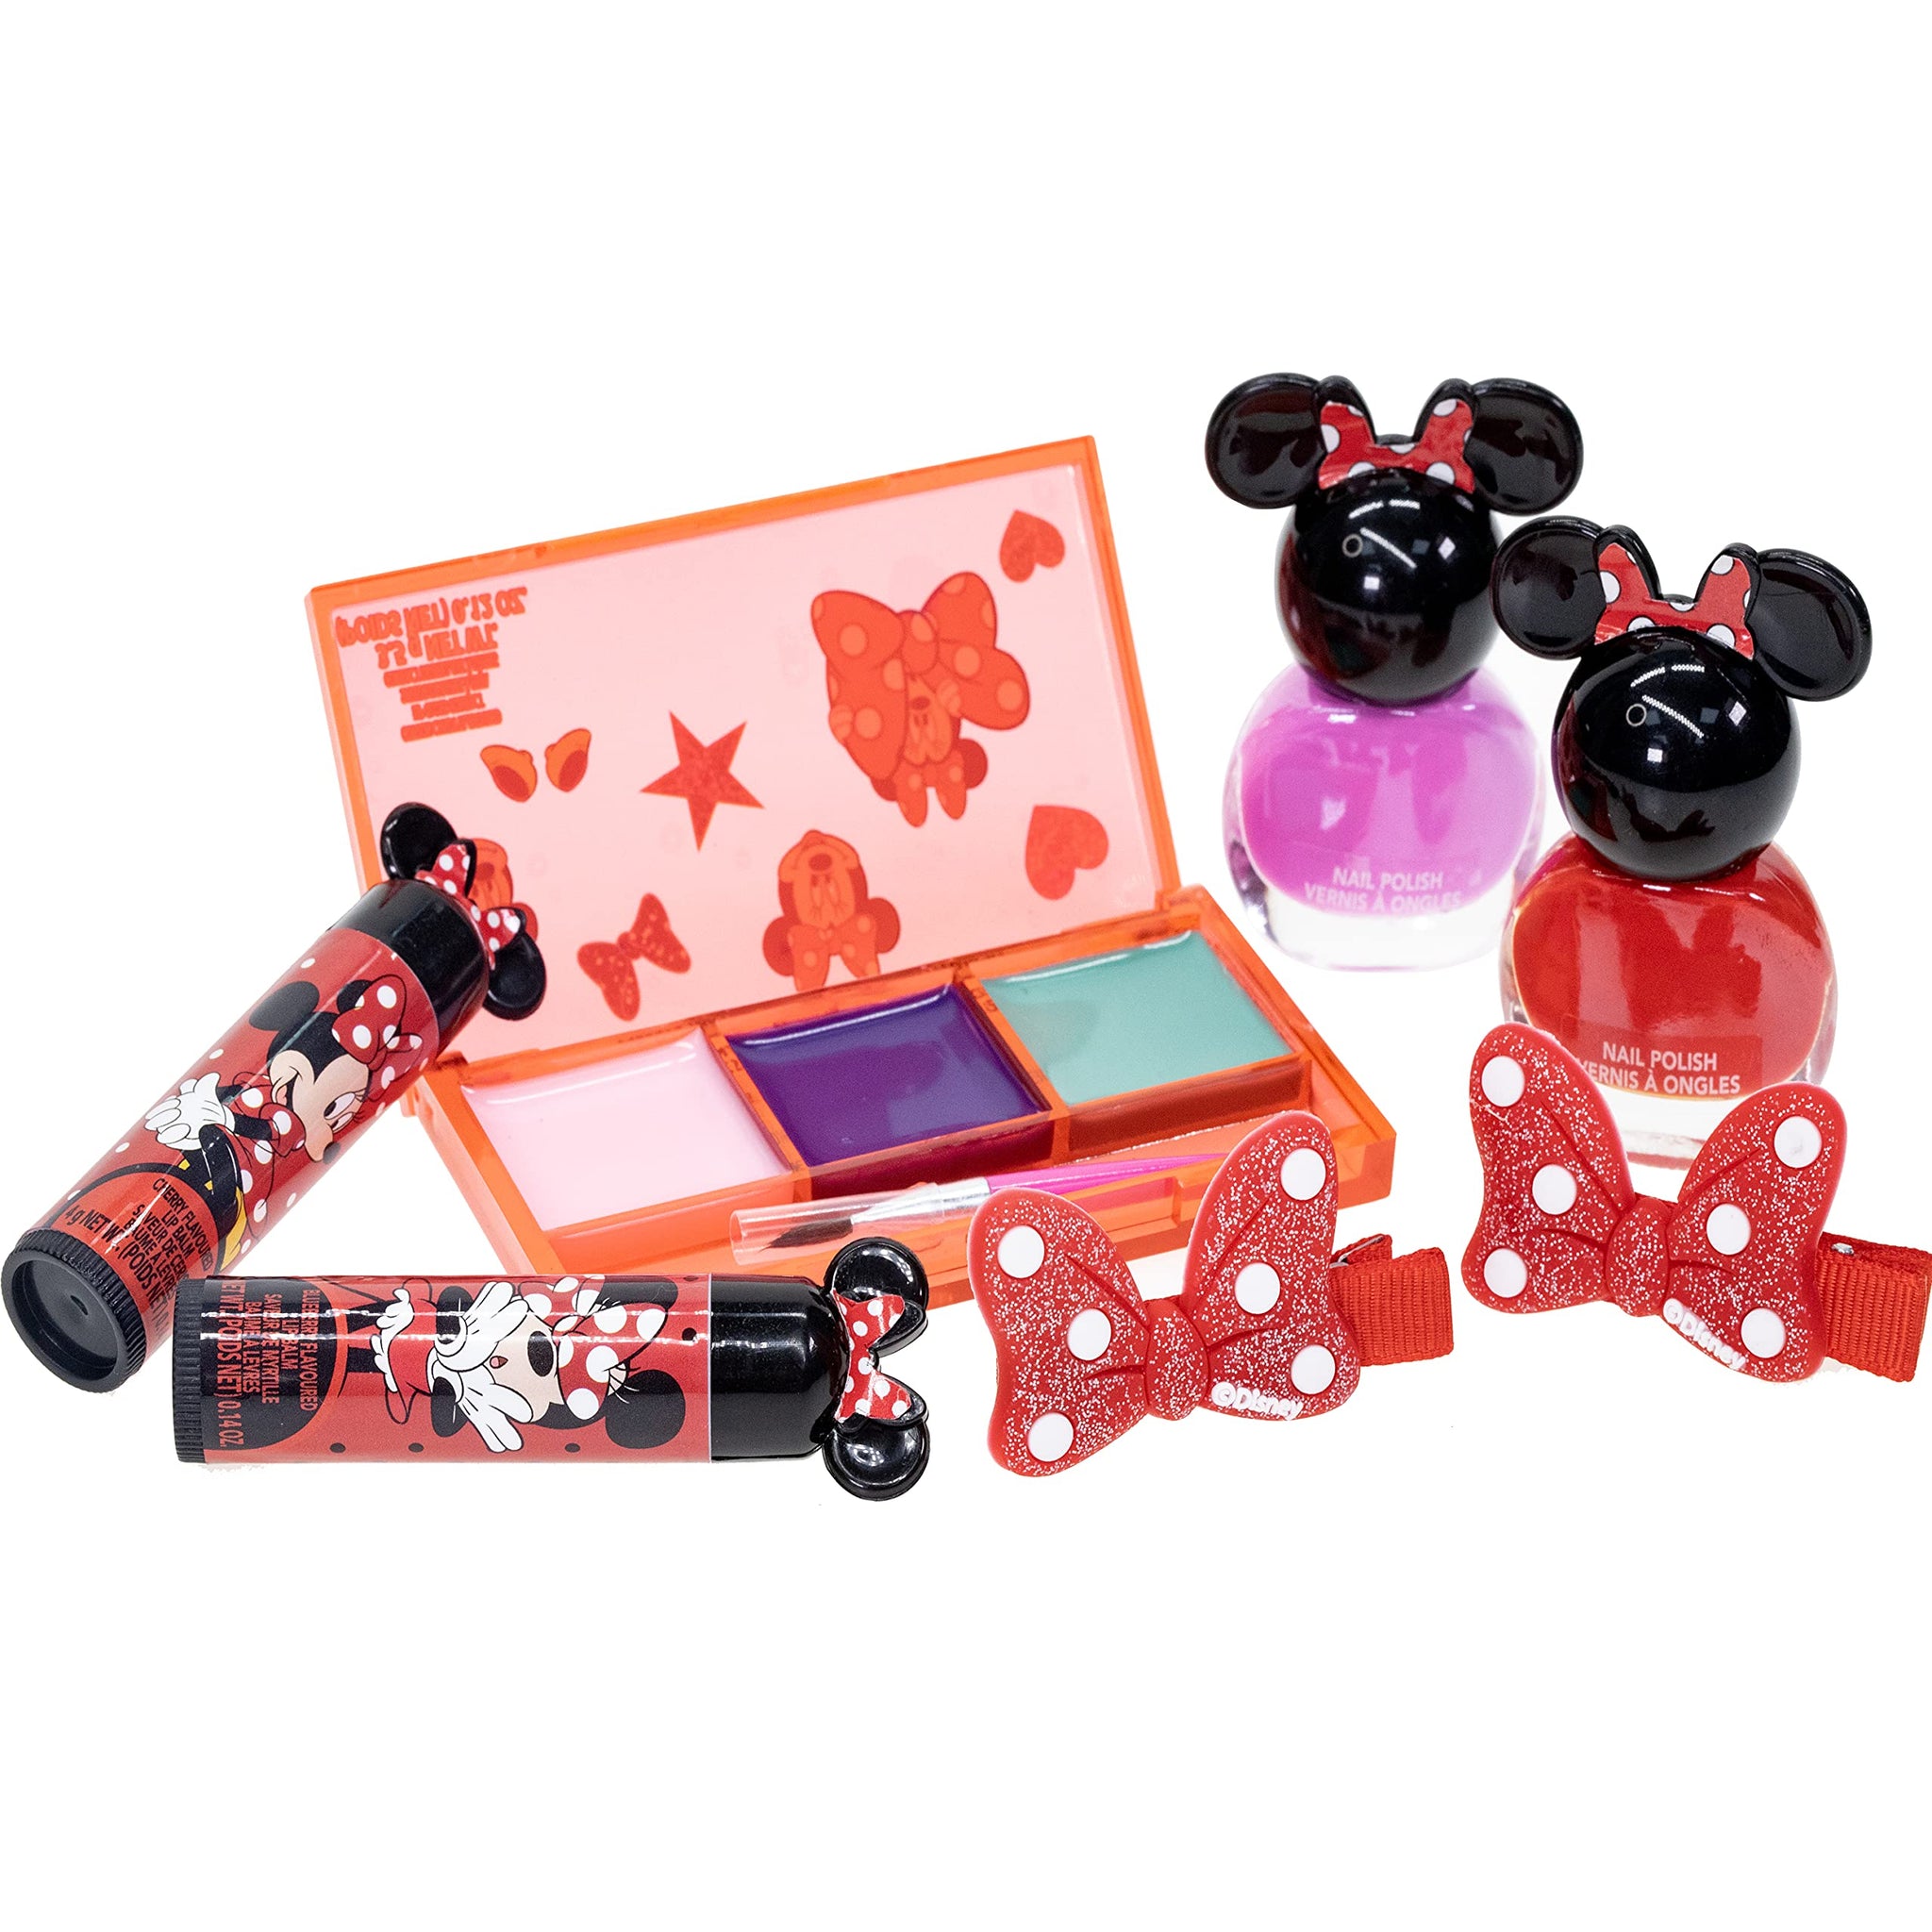 Mickey Minnie Mouse Makeup Toy Nail Stickers Toy Princess girls sticker  toys for girlfriend kids gift